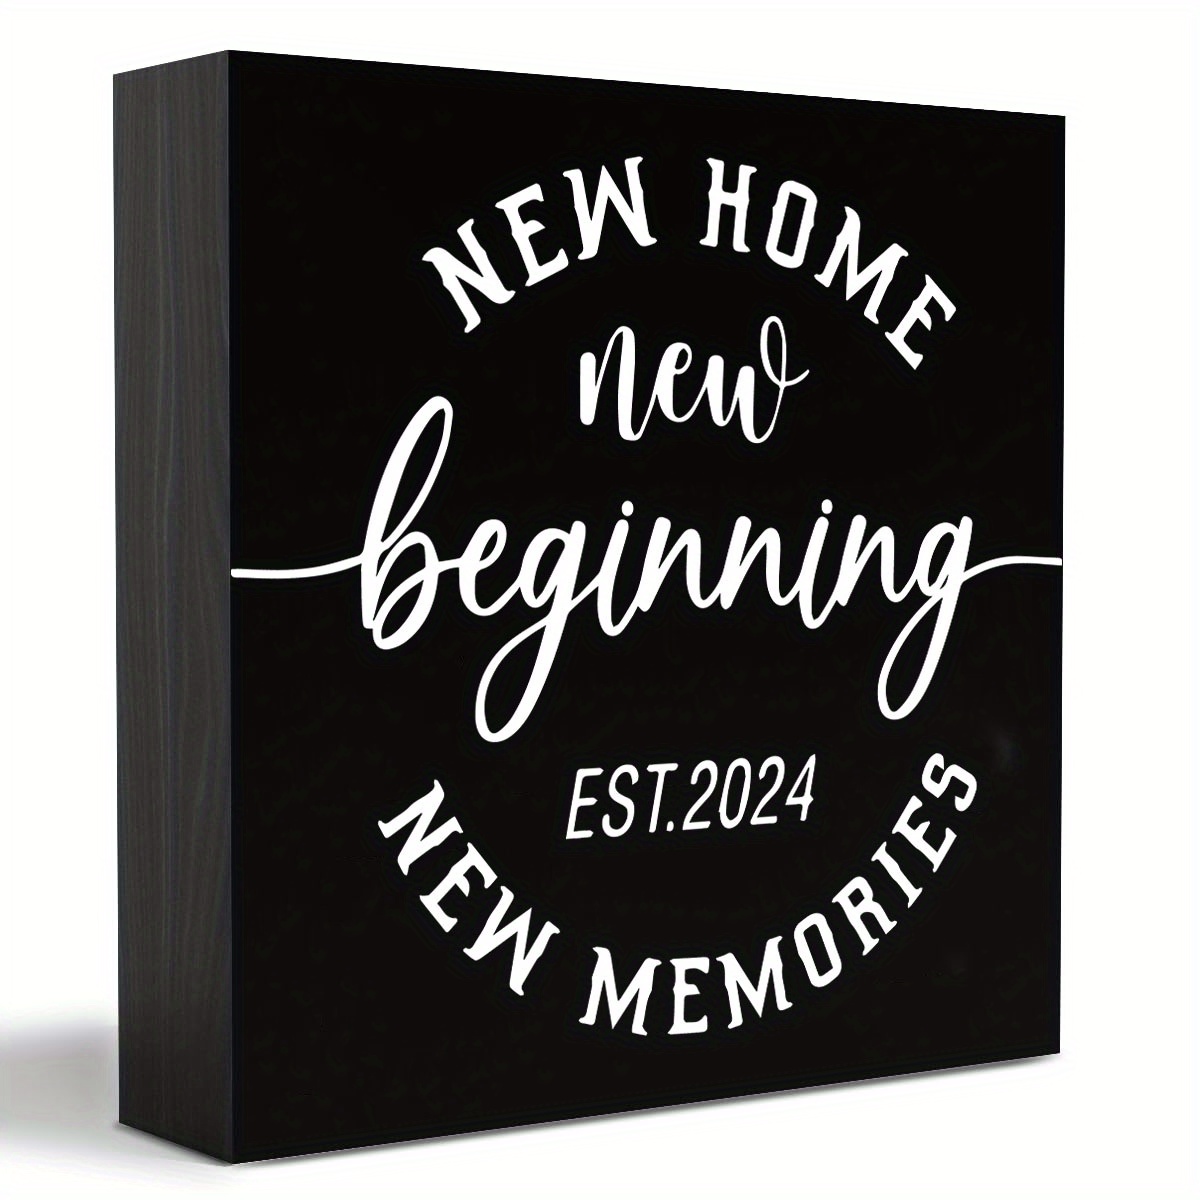 

1pc, Great Housewarming Gifts, New Home Gift Ideas, Great Housewarming Gift, New Home Decor, Rustic Home Accessories Decor, New Home New Beginning New Memories Wooden Box